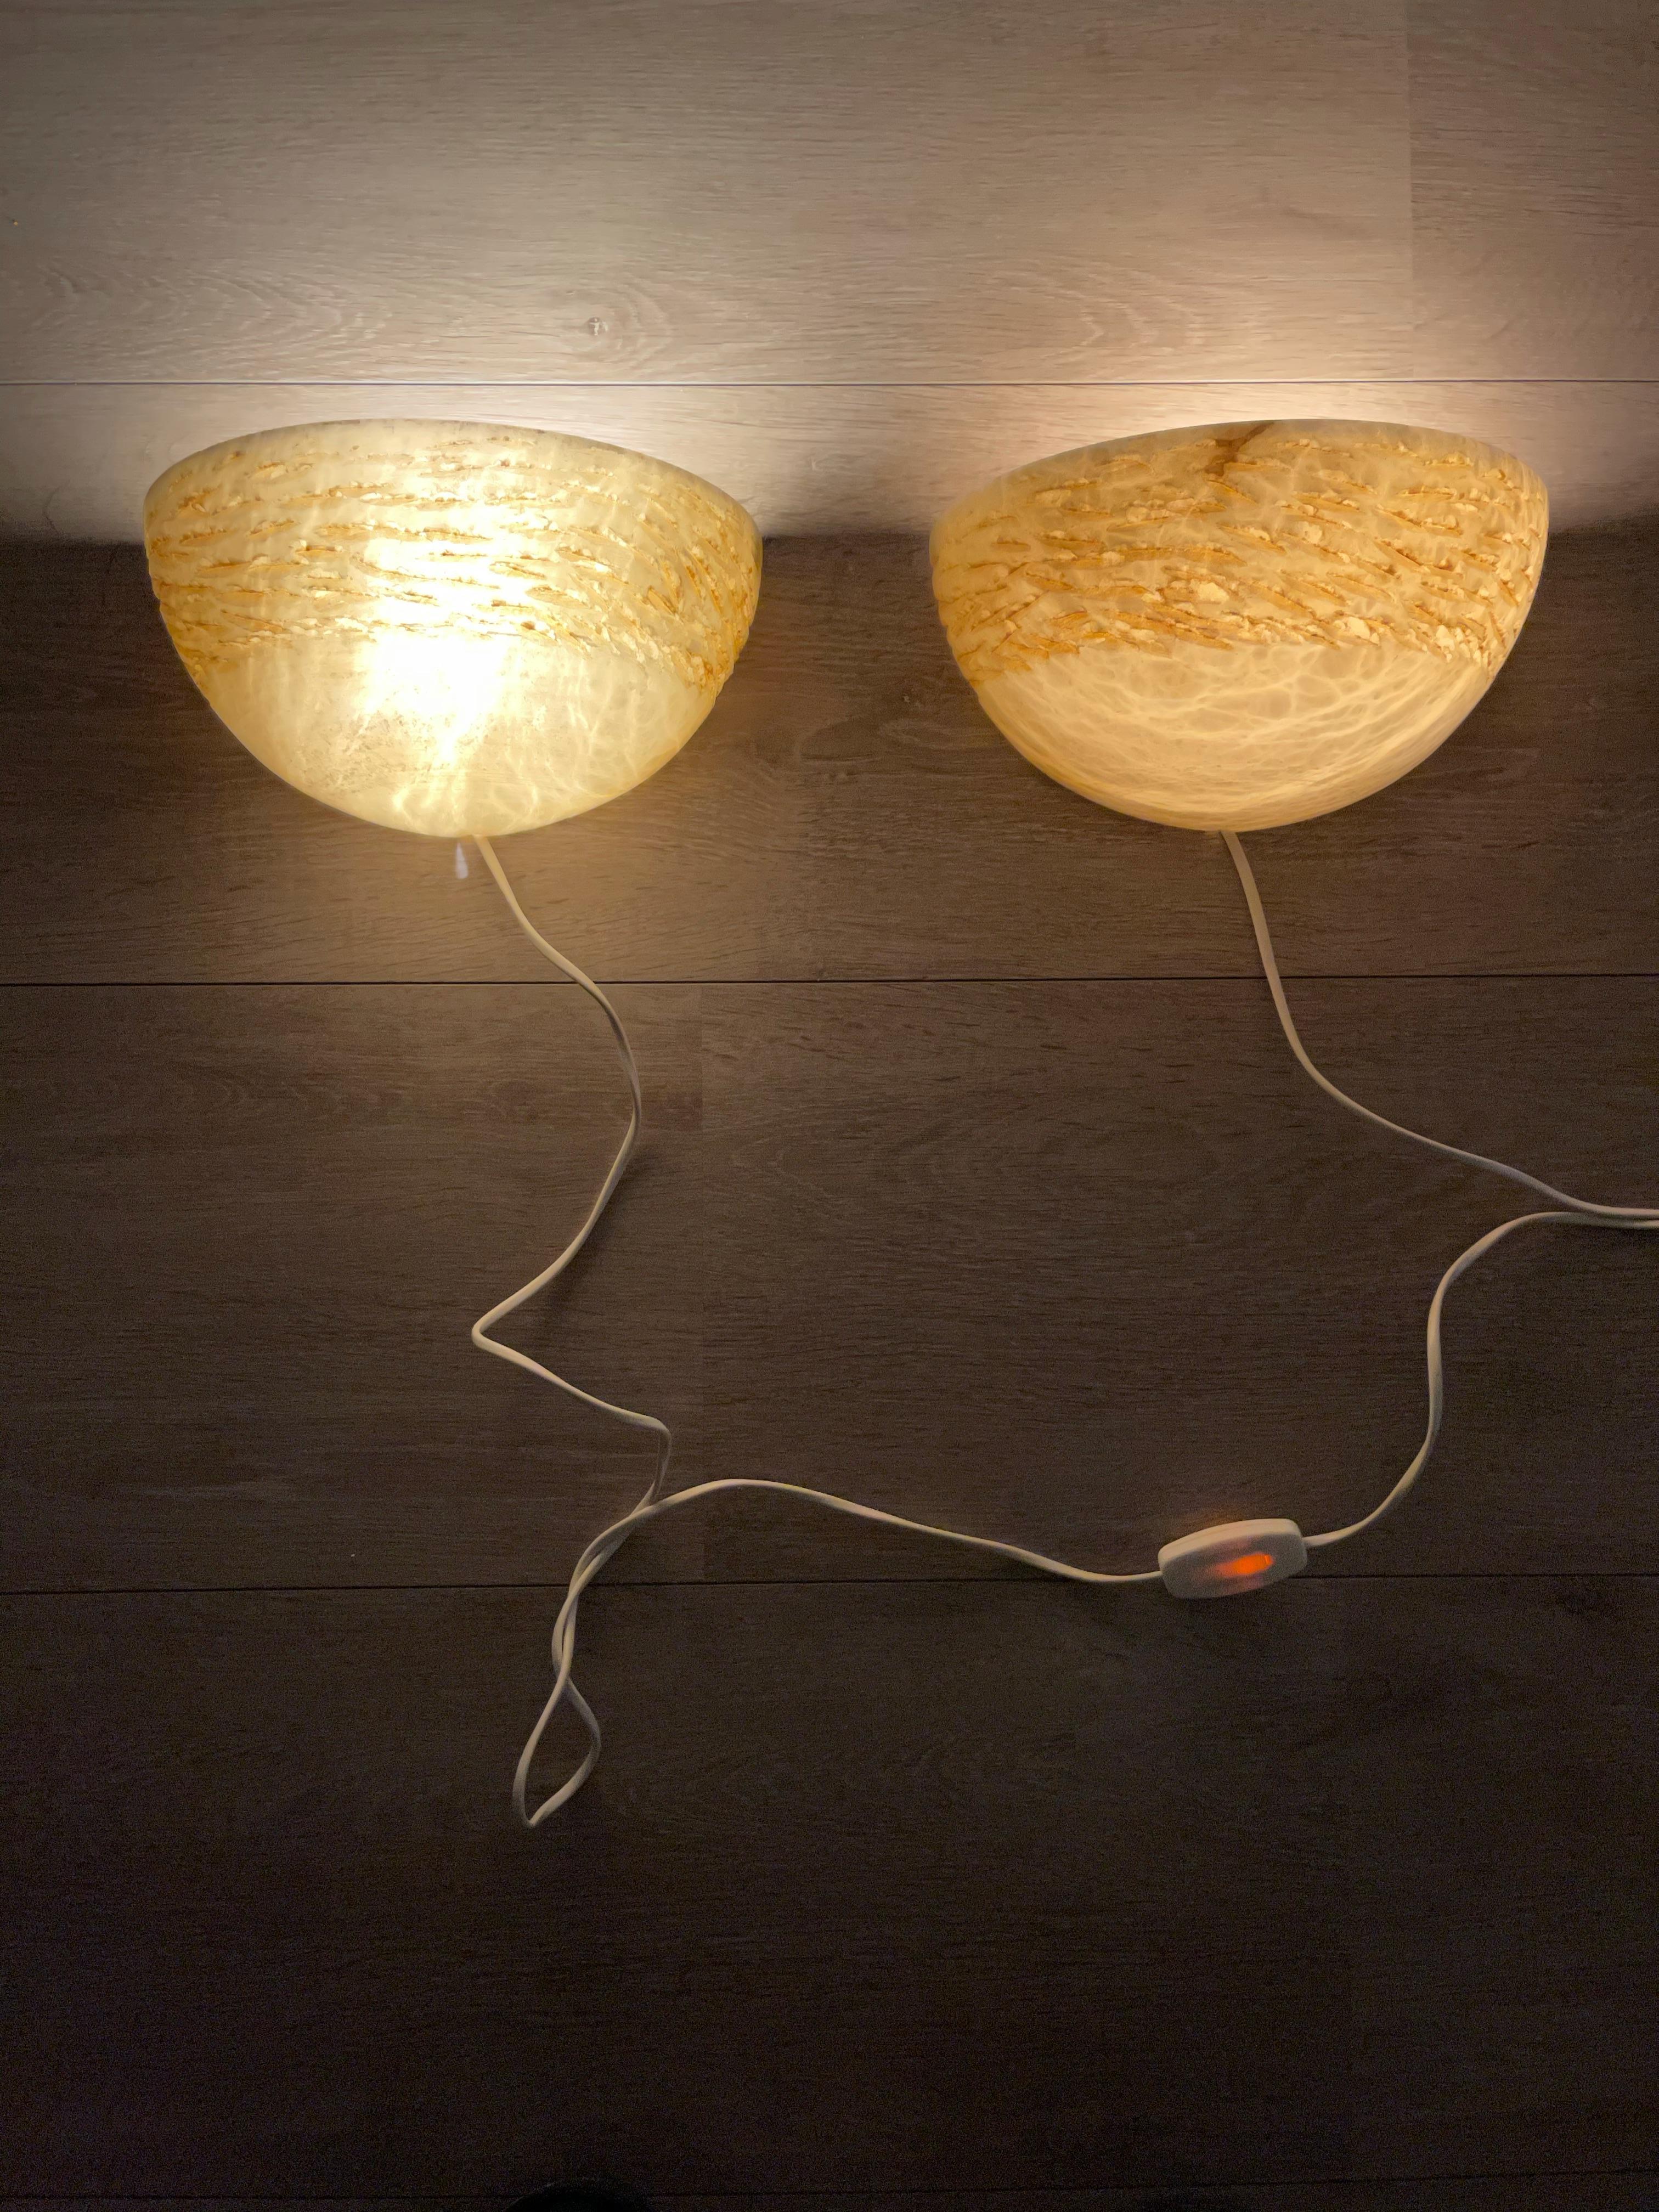 Rare Organic Design Midcentury Modern Pair of Alabaster Wall Sconces Wall Lights For Sale 4